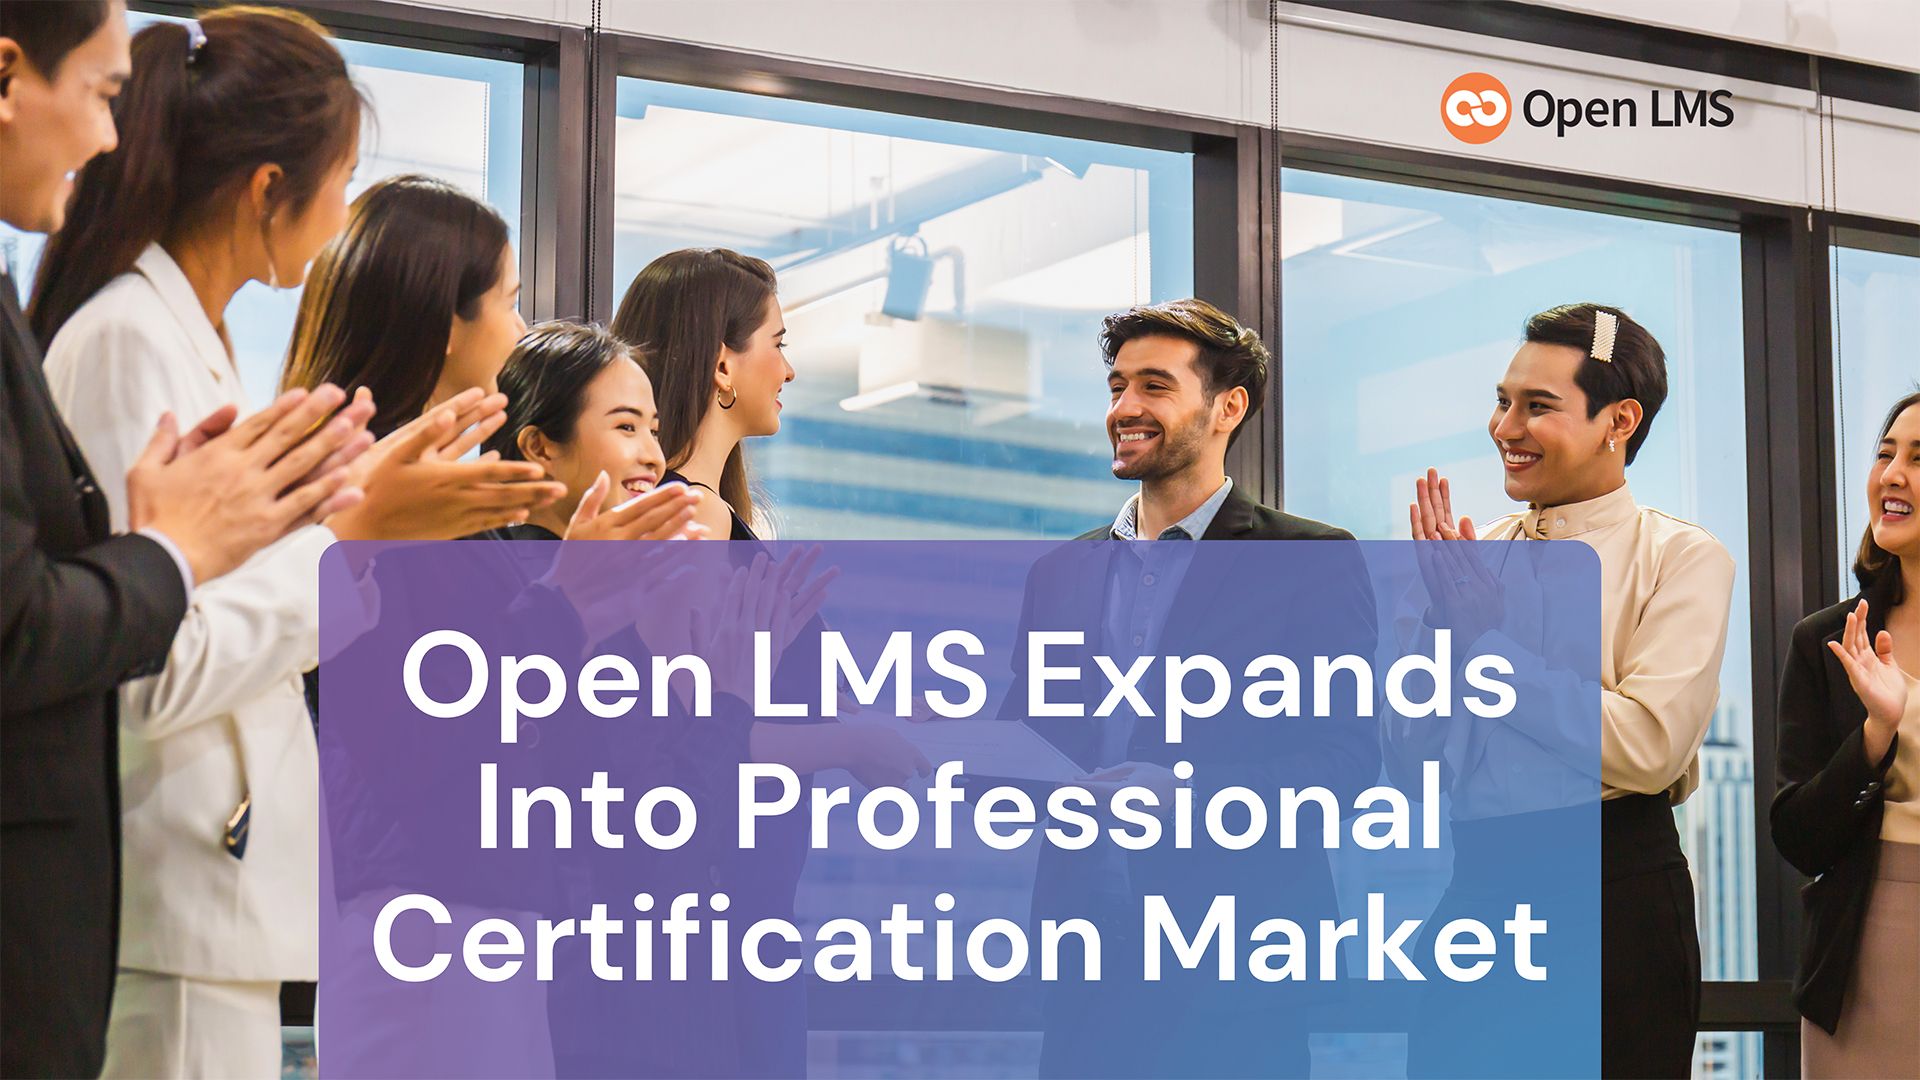 Open LMS Expands Into Professional Certification Market